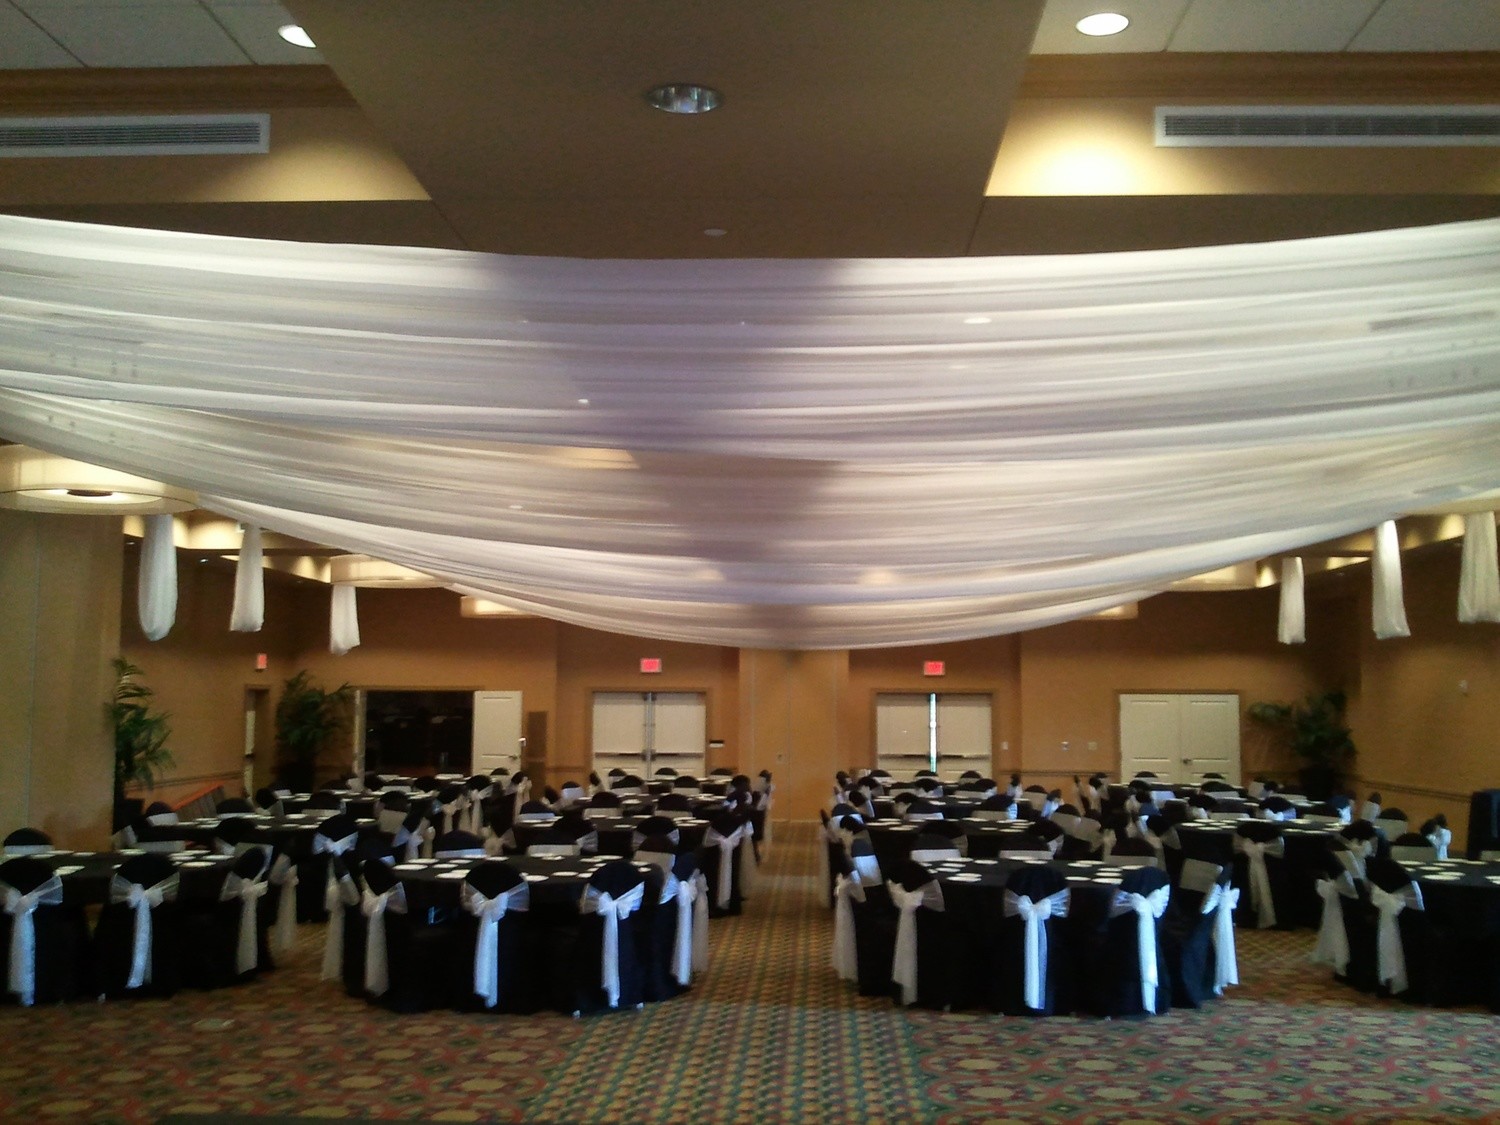 Flat Ceiling Draping